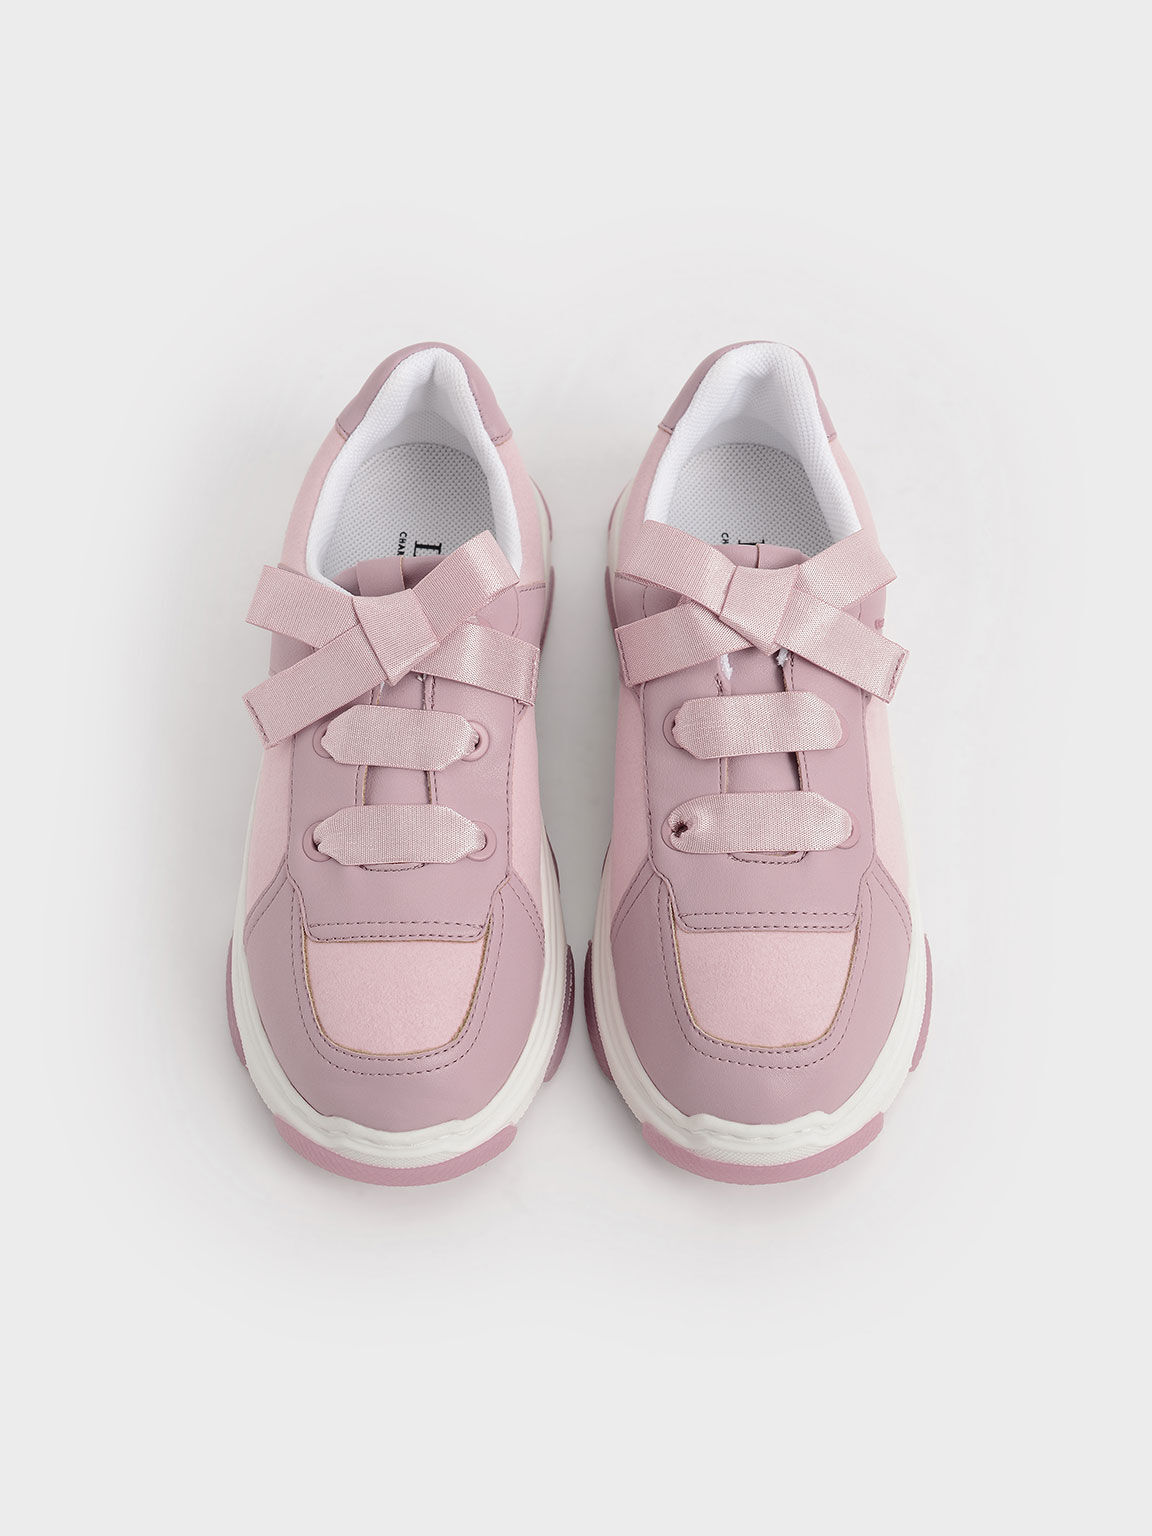 MM6 Maison Margiela - Bow Sneakers | HBX - Globally Curated Fashion and  Lifestyle by Hypebeast